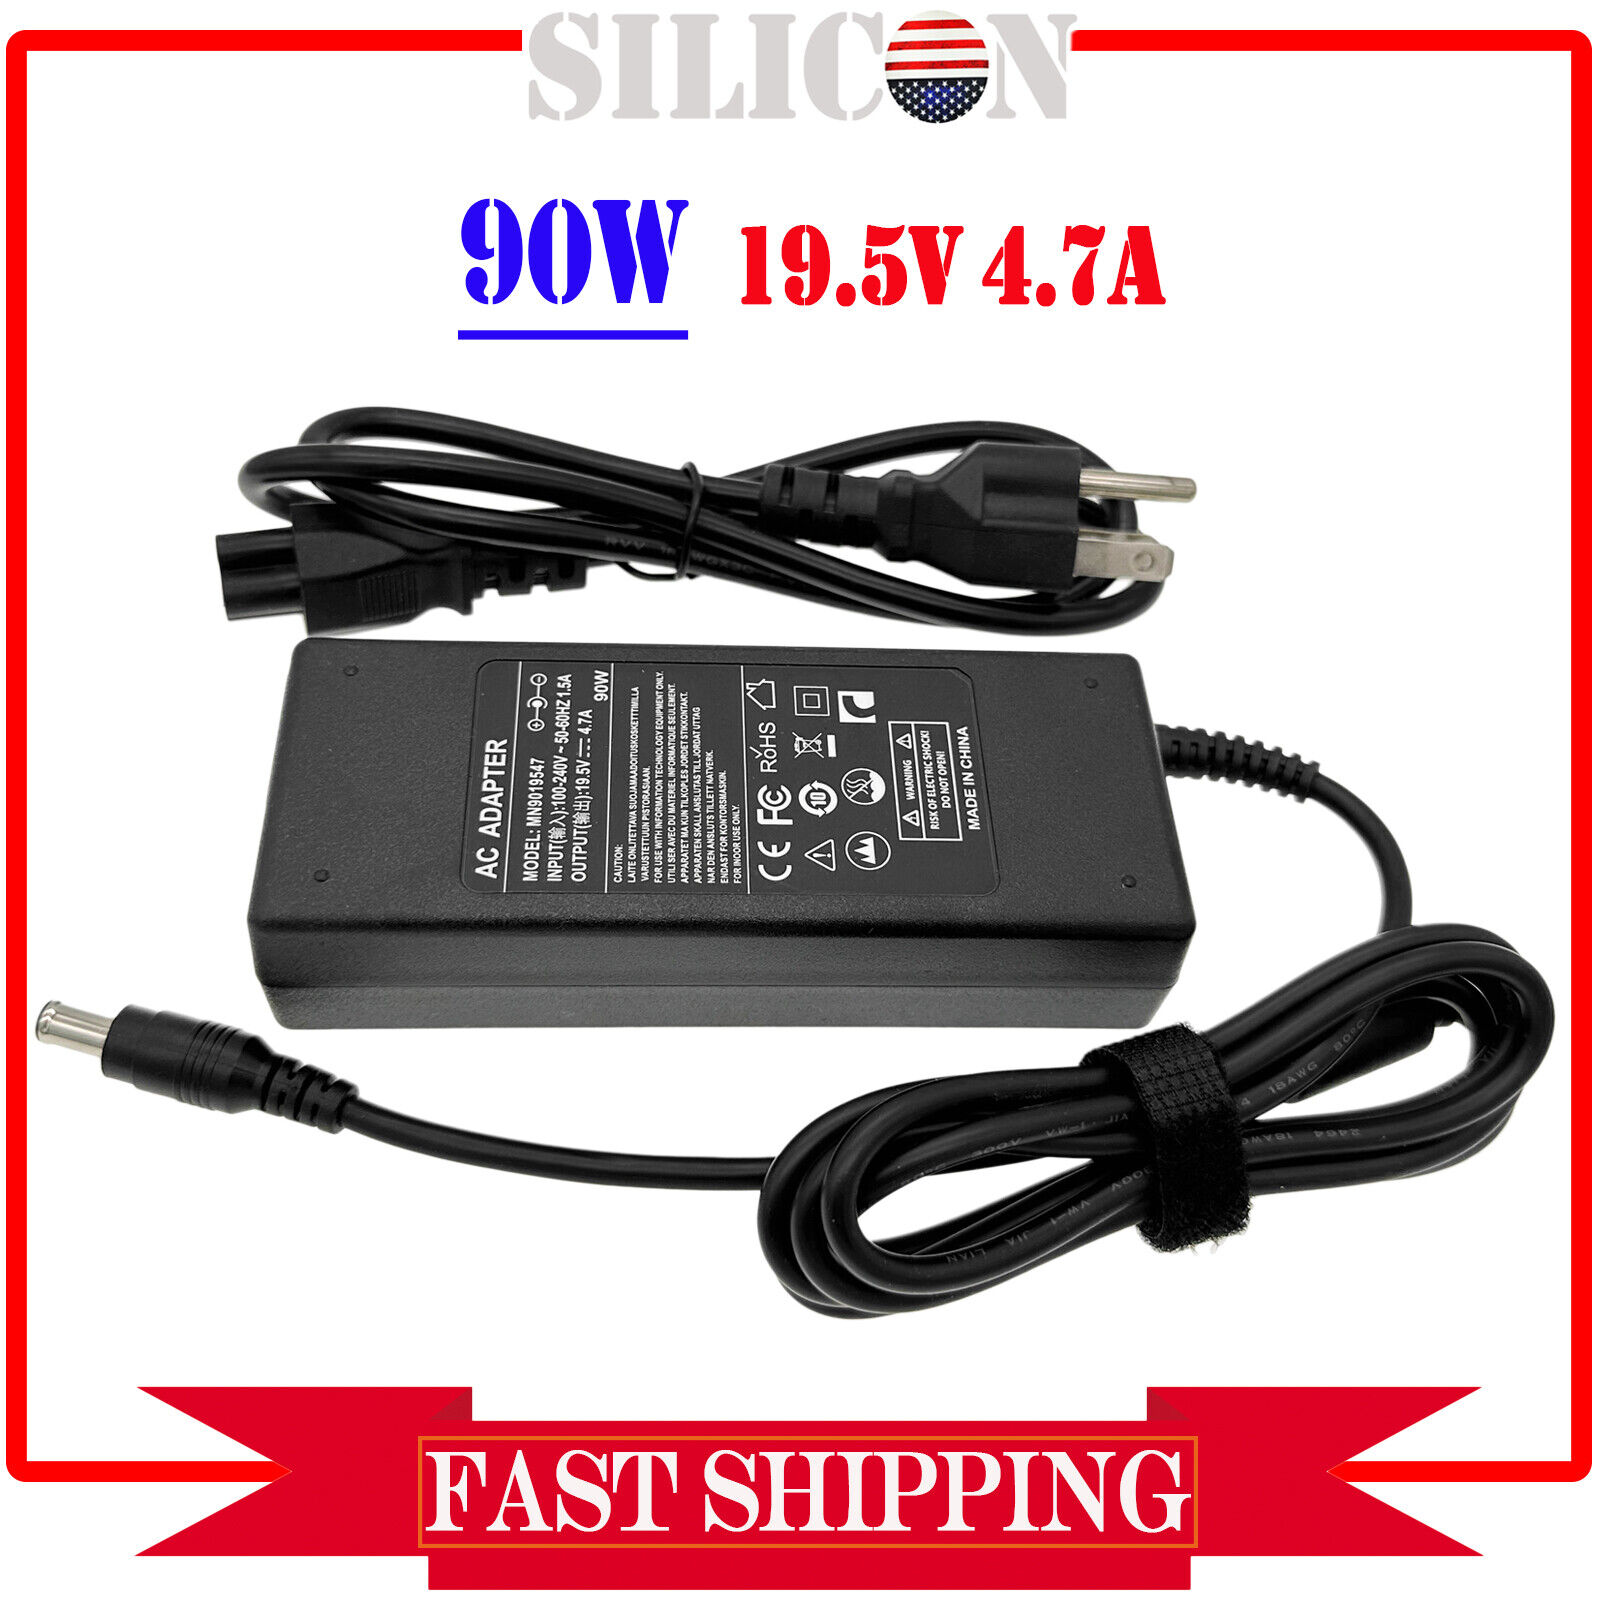 AC Adapter Charger Power For SONY VAIO PCG-61215L PCG-61317L PCG-971L